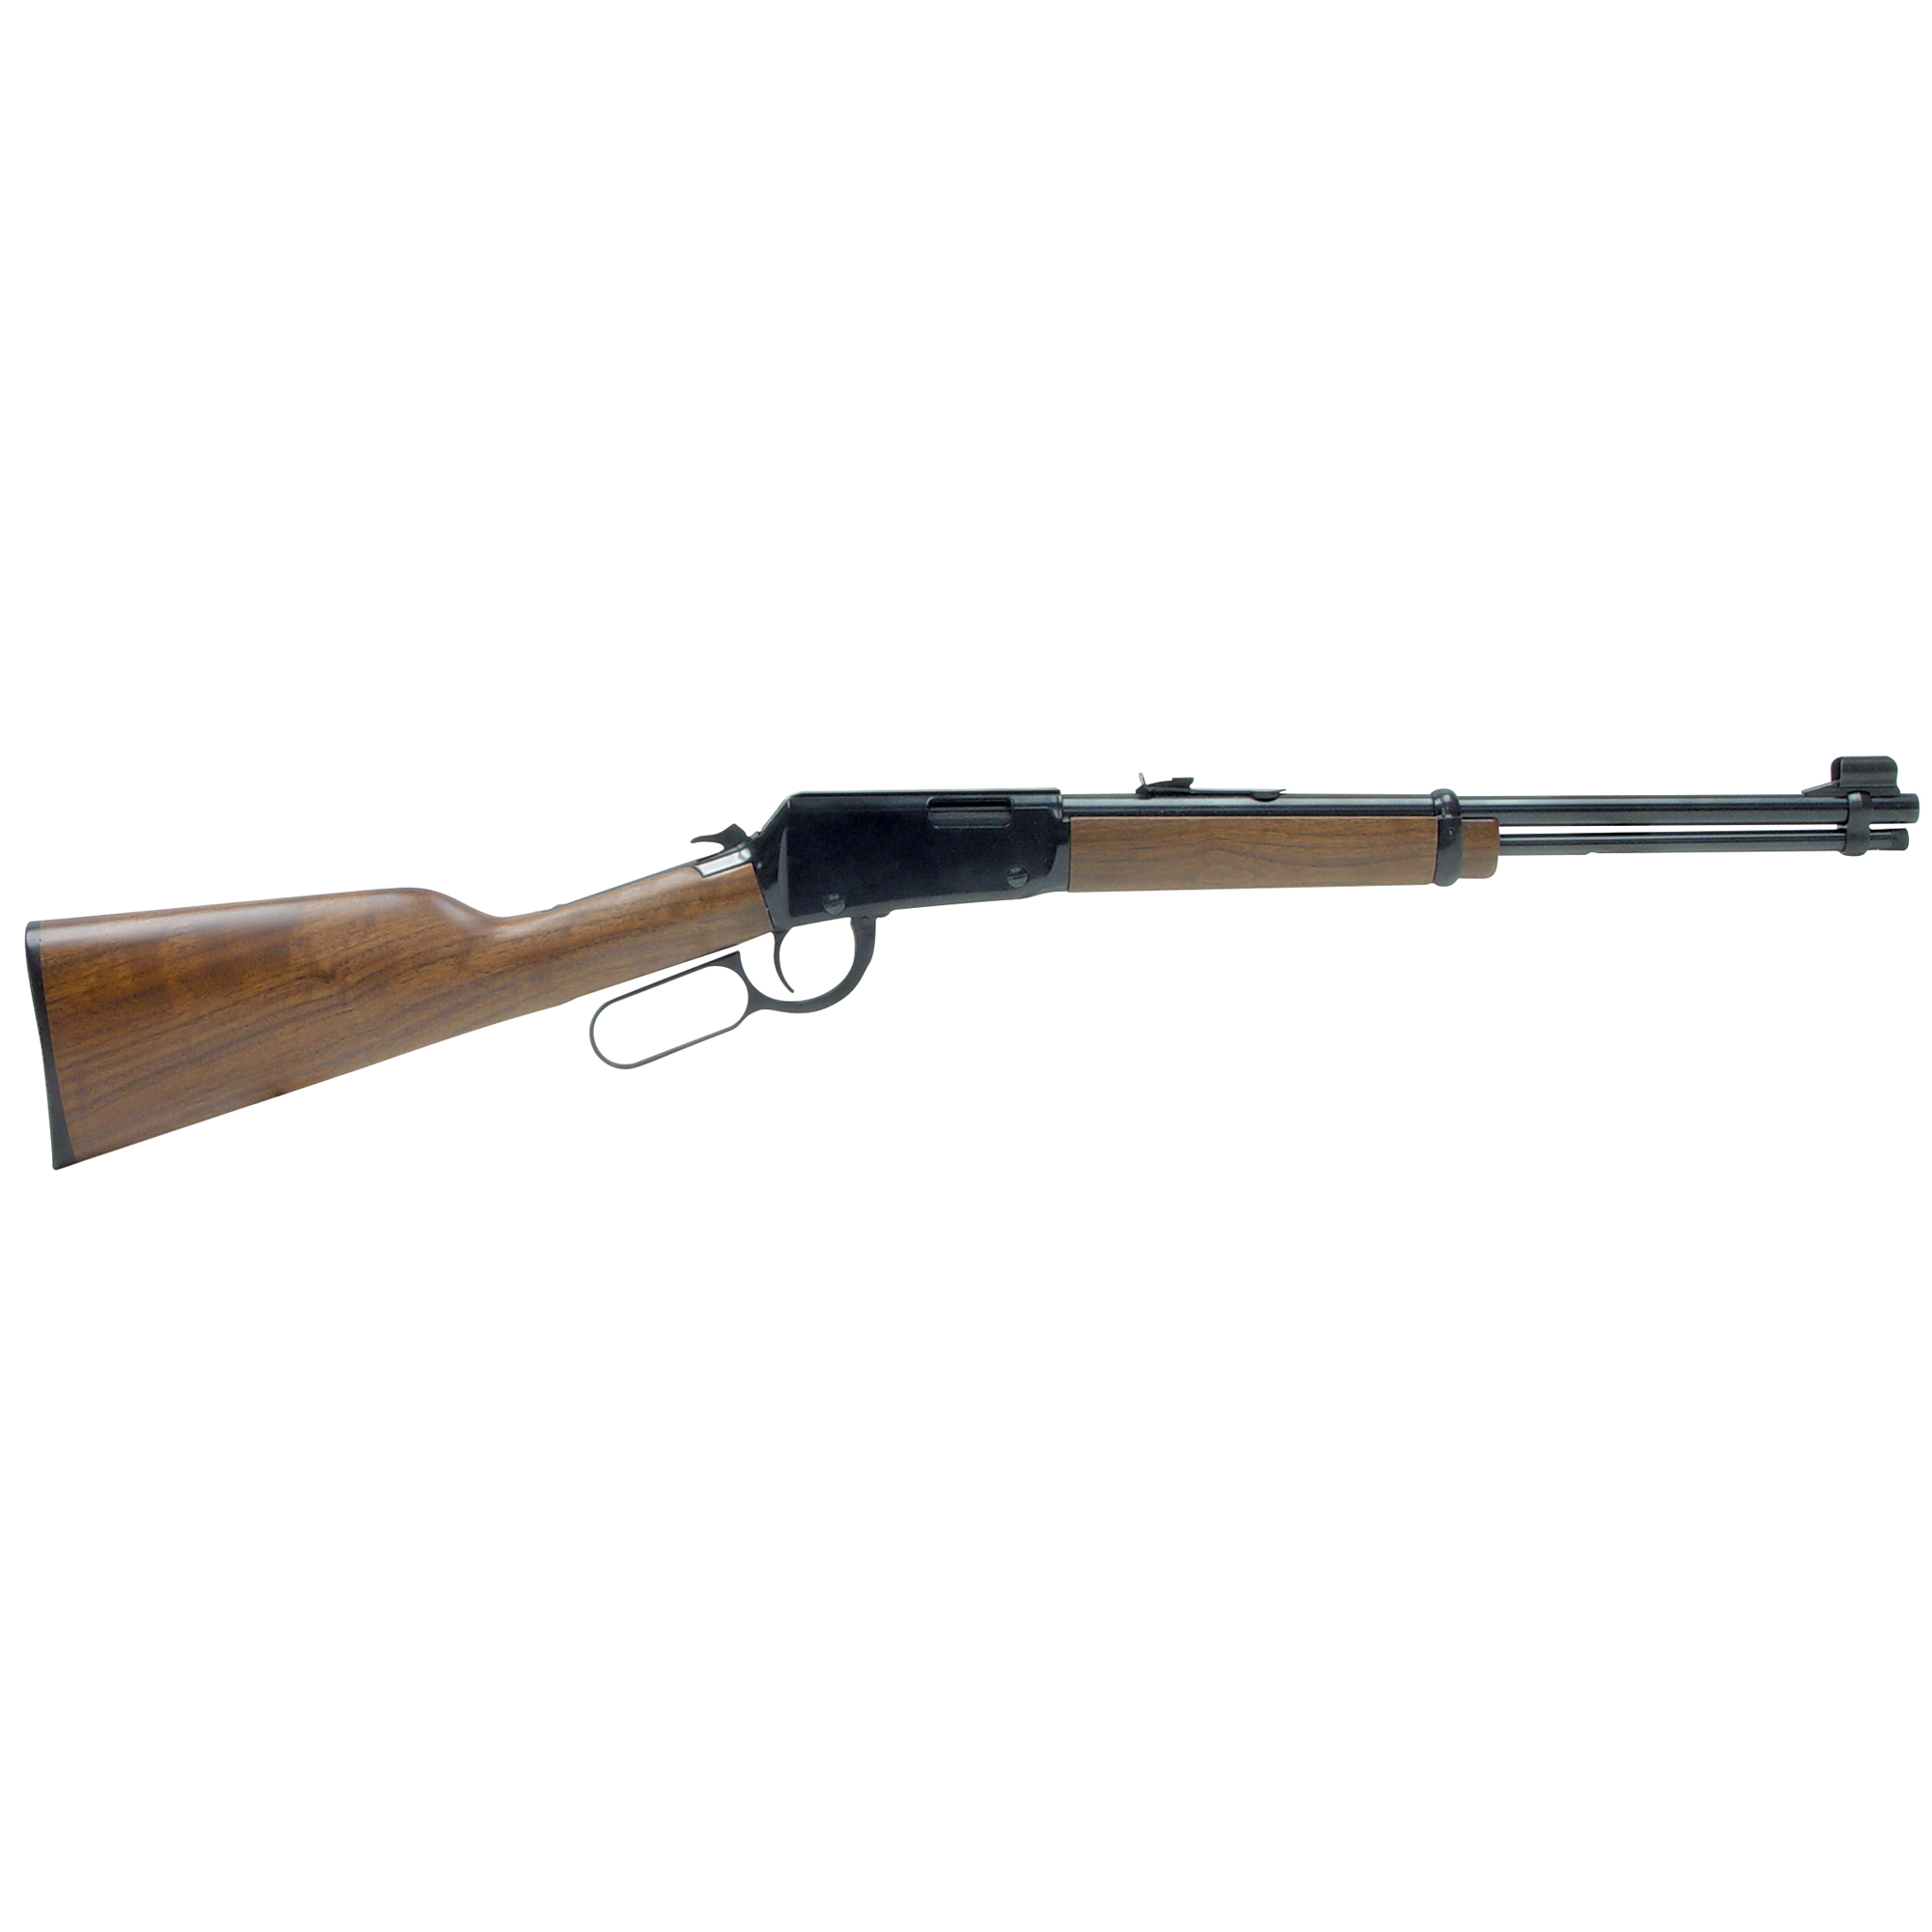 HENRY CLASSIC COMPACT 22LR 16.125